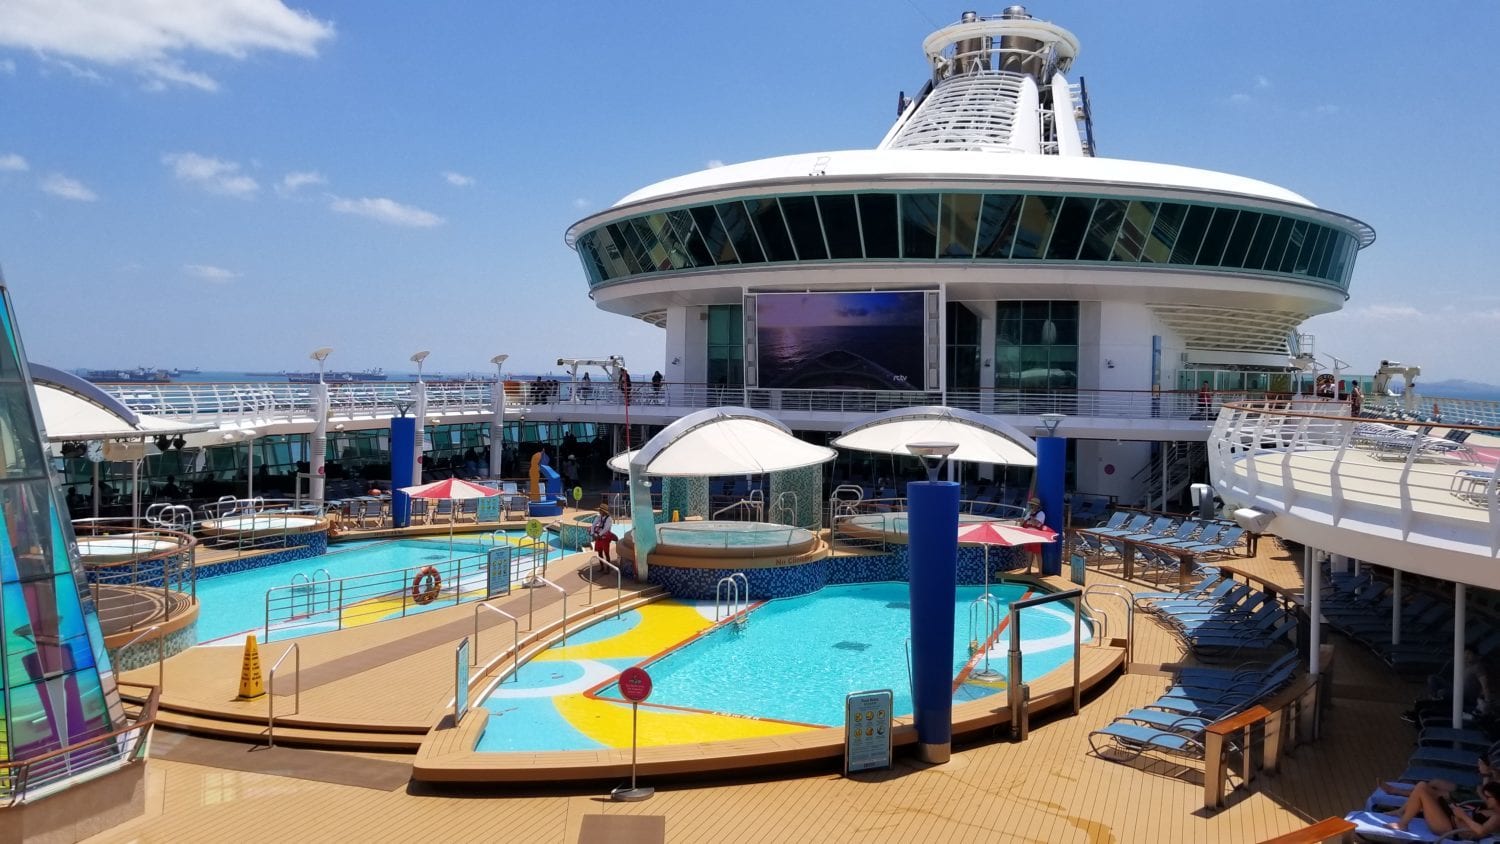 First Impressions of Royal Caribbean's Voyager of the Seas